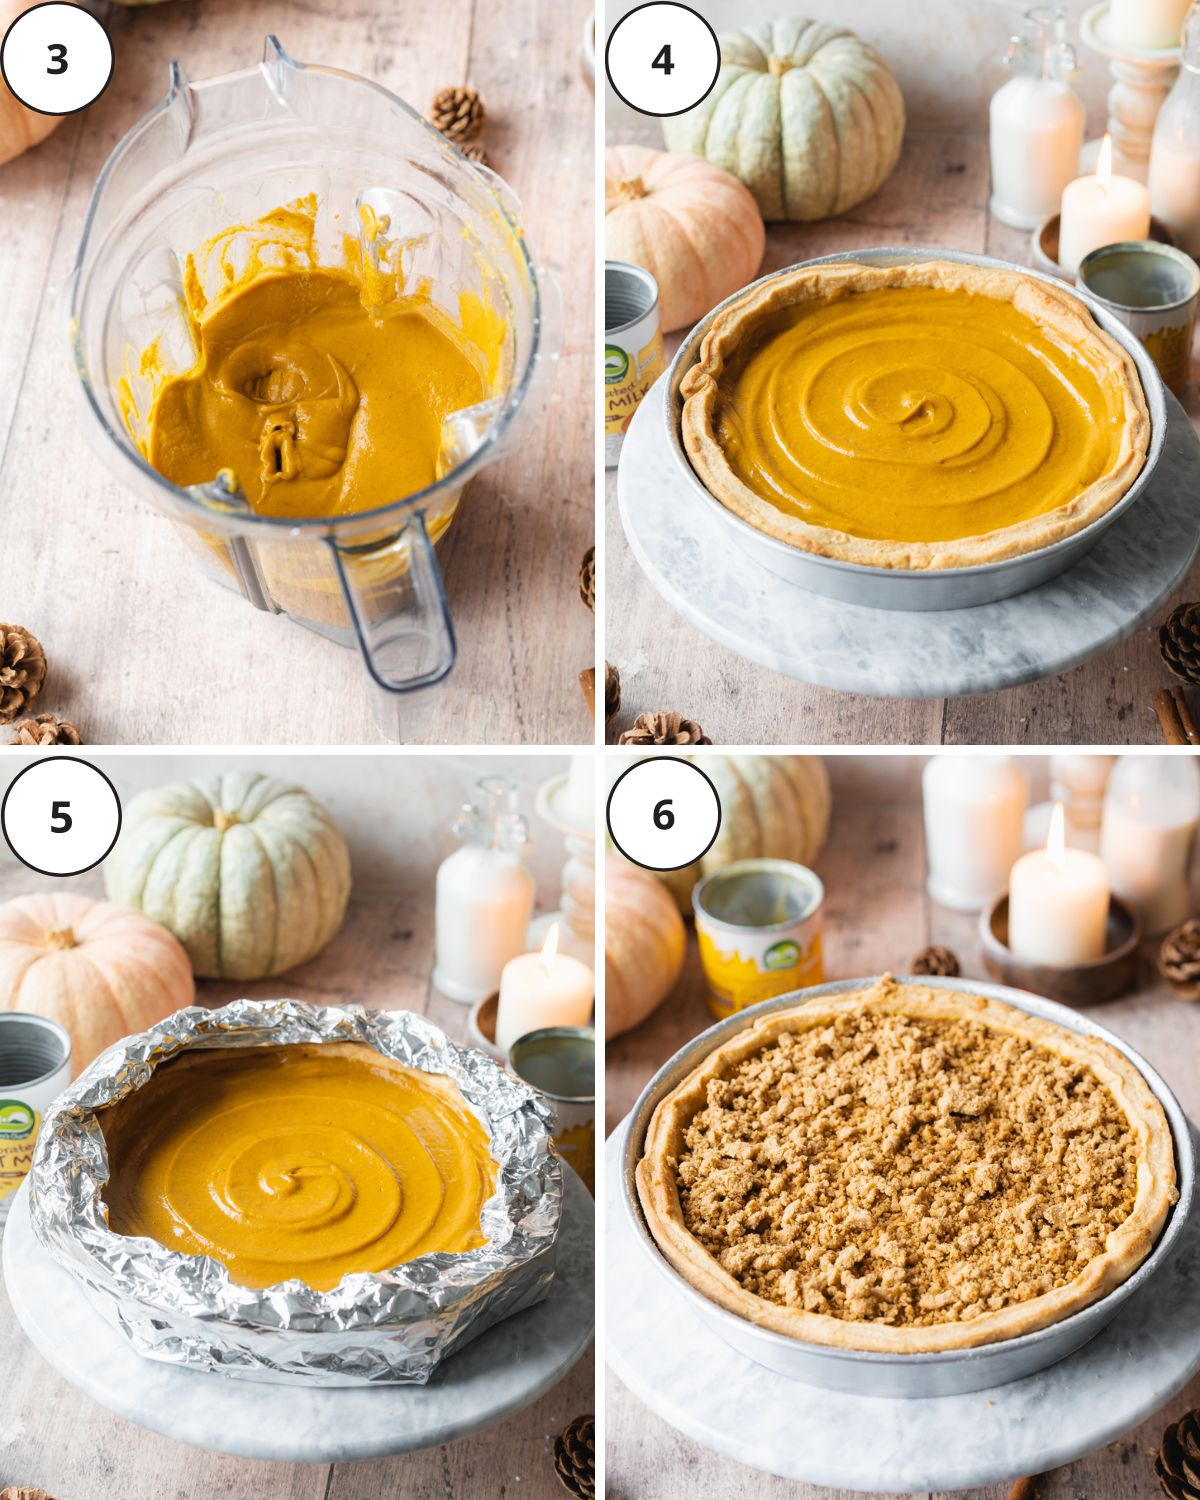 pumpkin pie filling in a blender jug and in a pie crust with crumble topping.